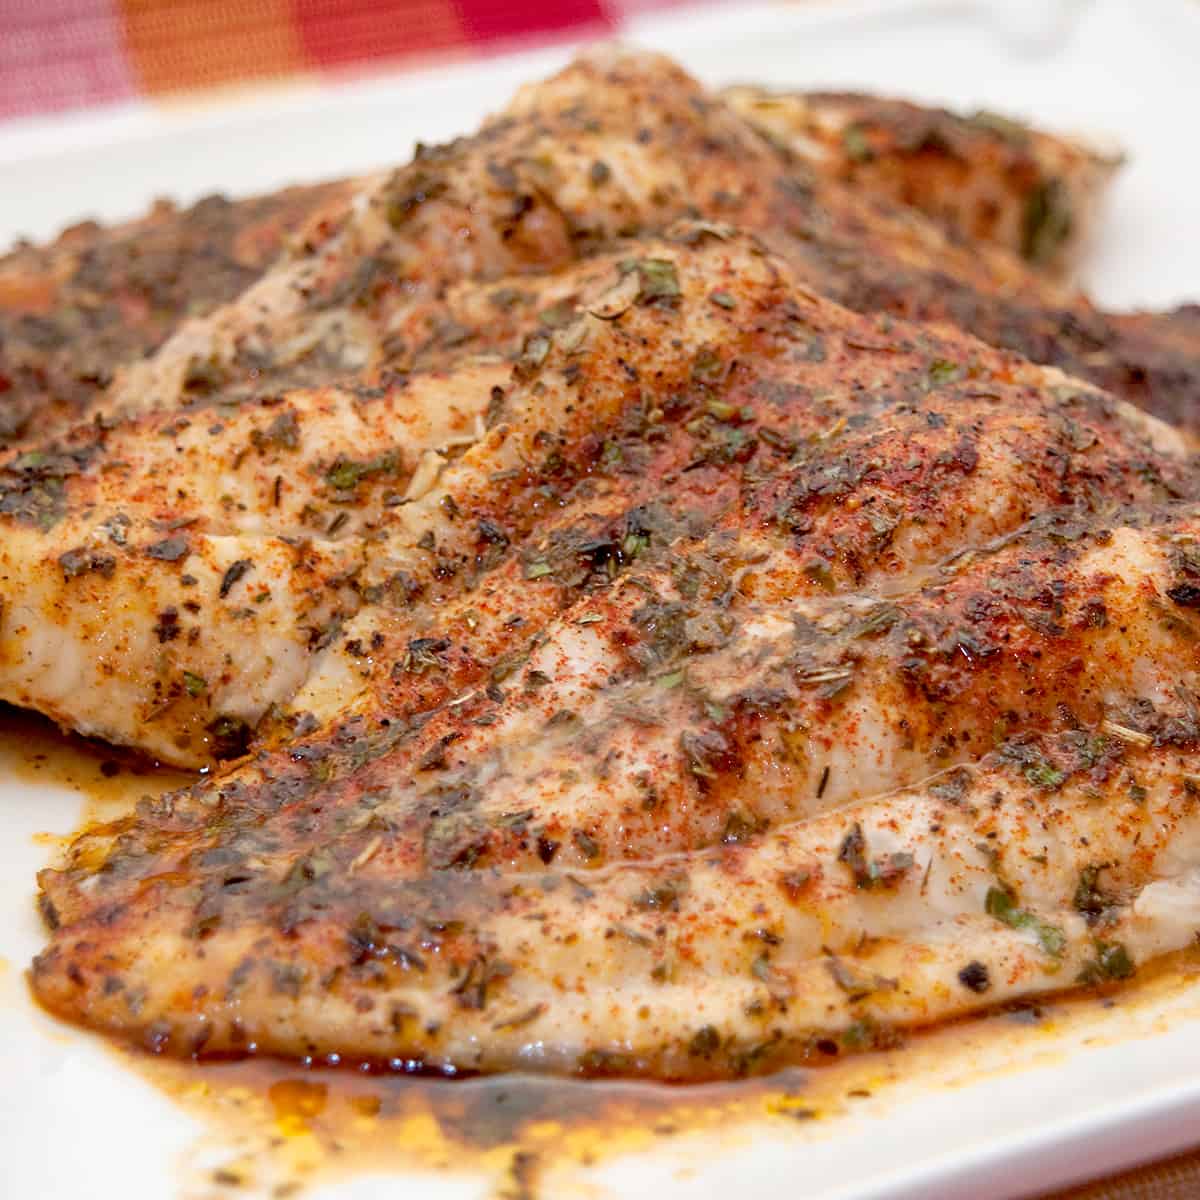 Baked Catfish with Herbs - catfish fillets topped with an herb blend, butter and lemon and baked until golden. Quick and easy weeknight dinner. From @NevrEnoughThyme https://www.lanascooking.com/baked-catfish